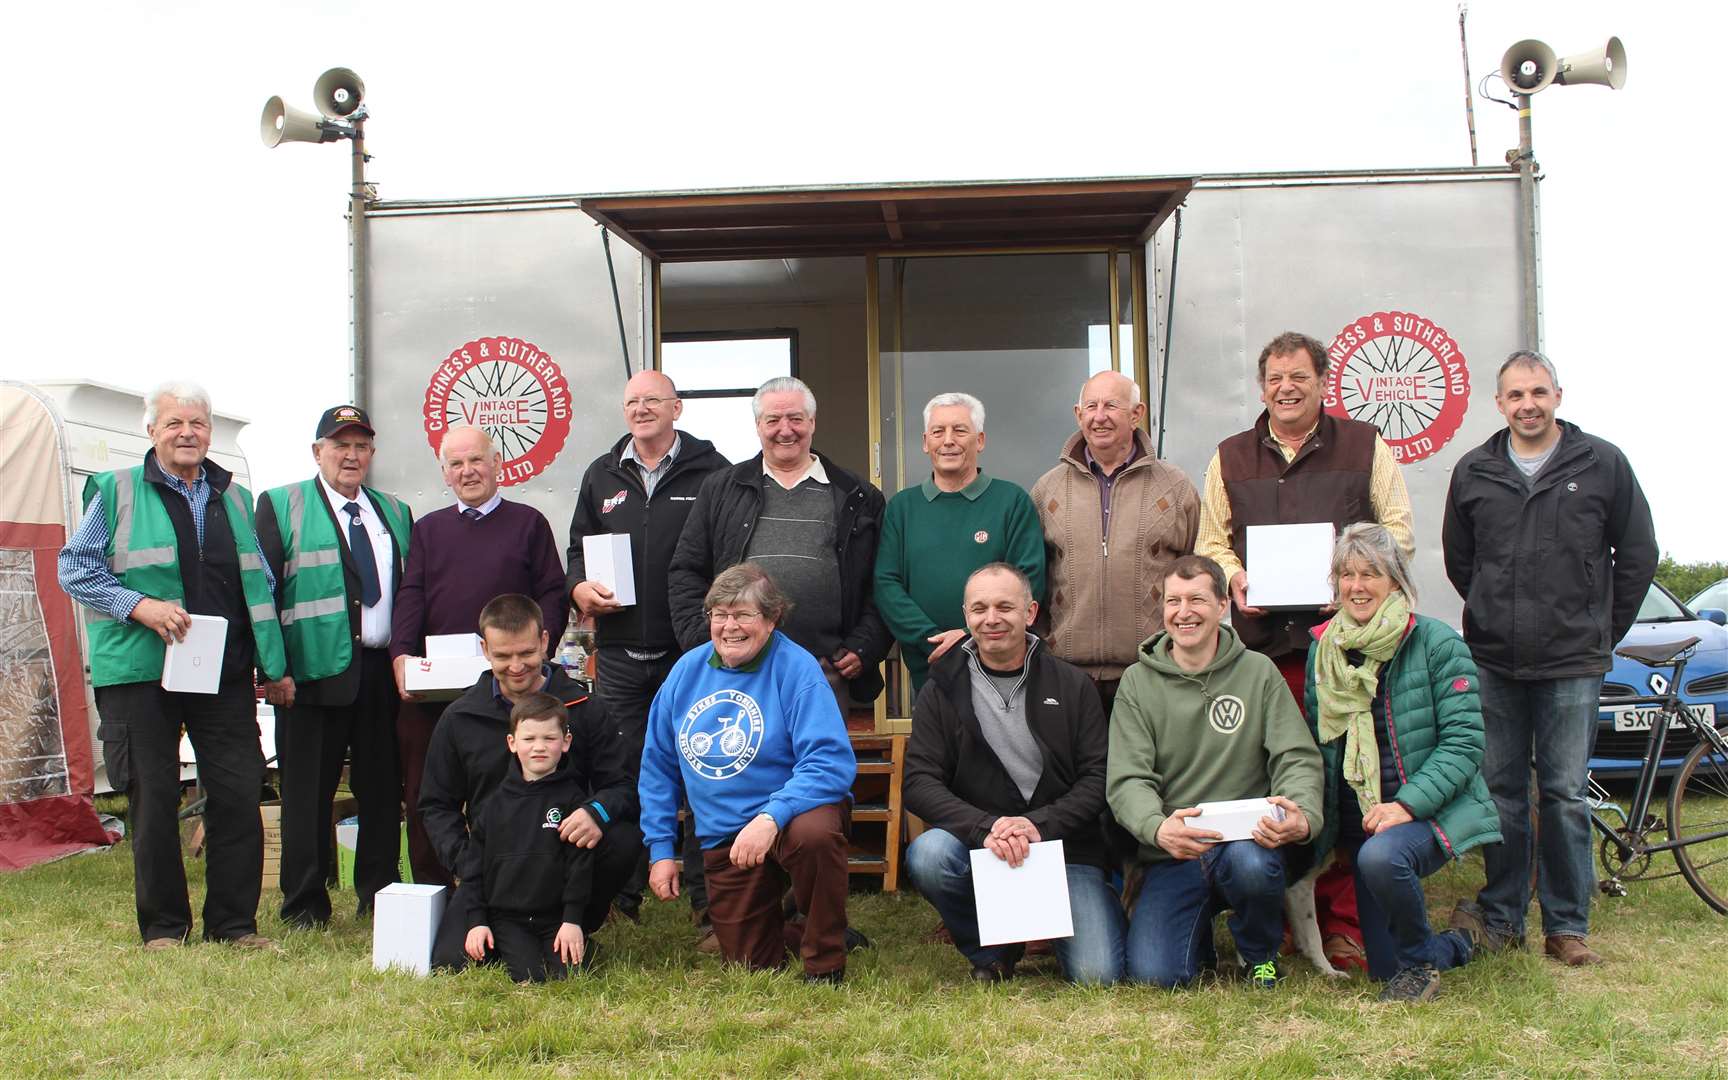 David Green (left) and others from Caithness and Sutherland Vintage and Classic Vehicle Club with prize-winners at the John O'Groats vintage rally in 2019. Picture: Alan Hendry